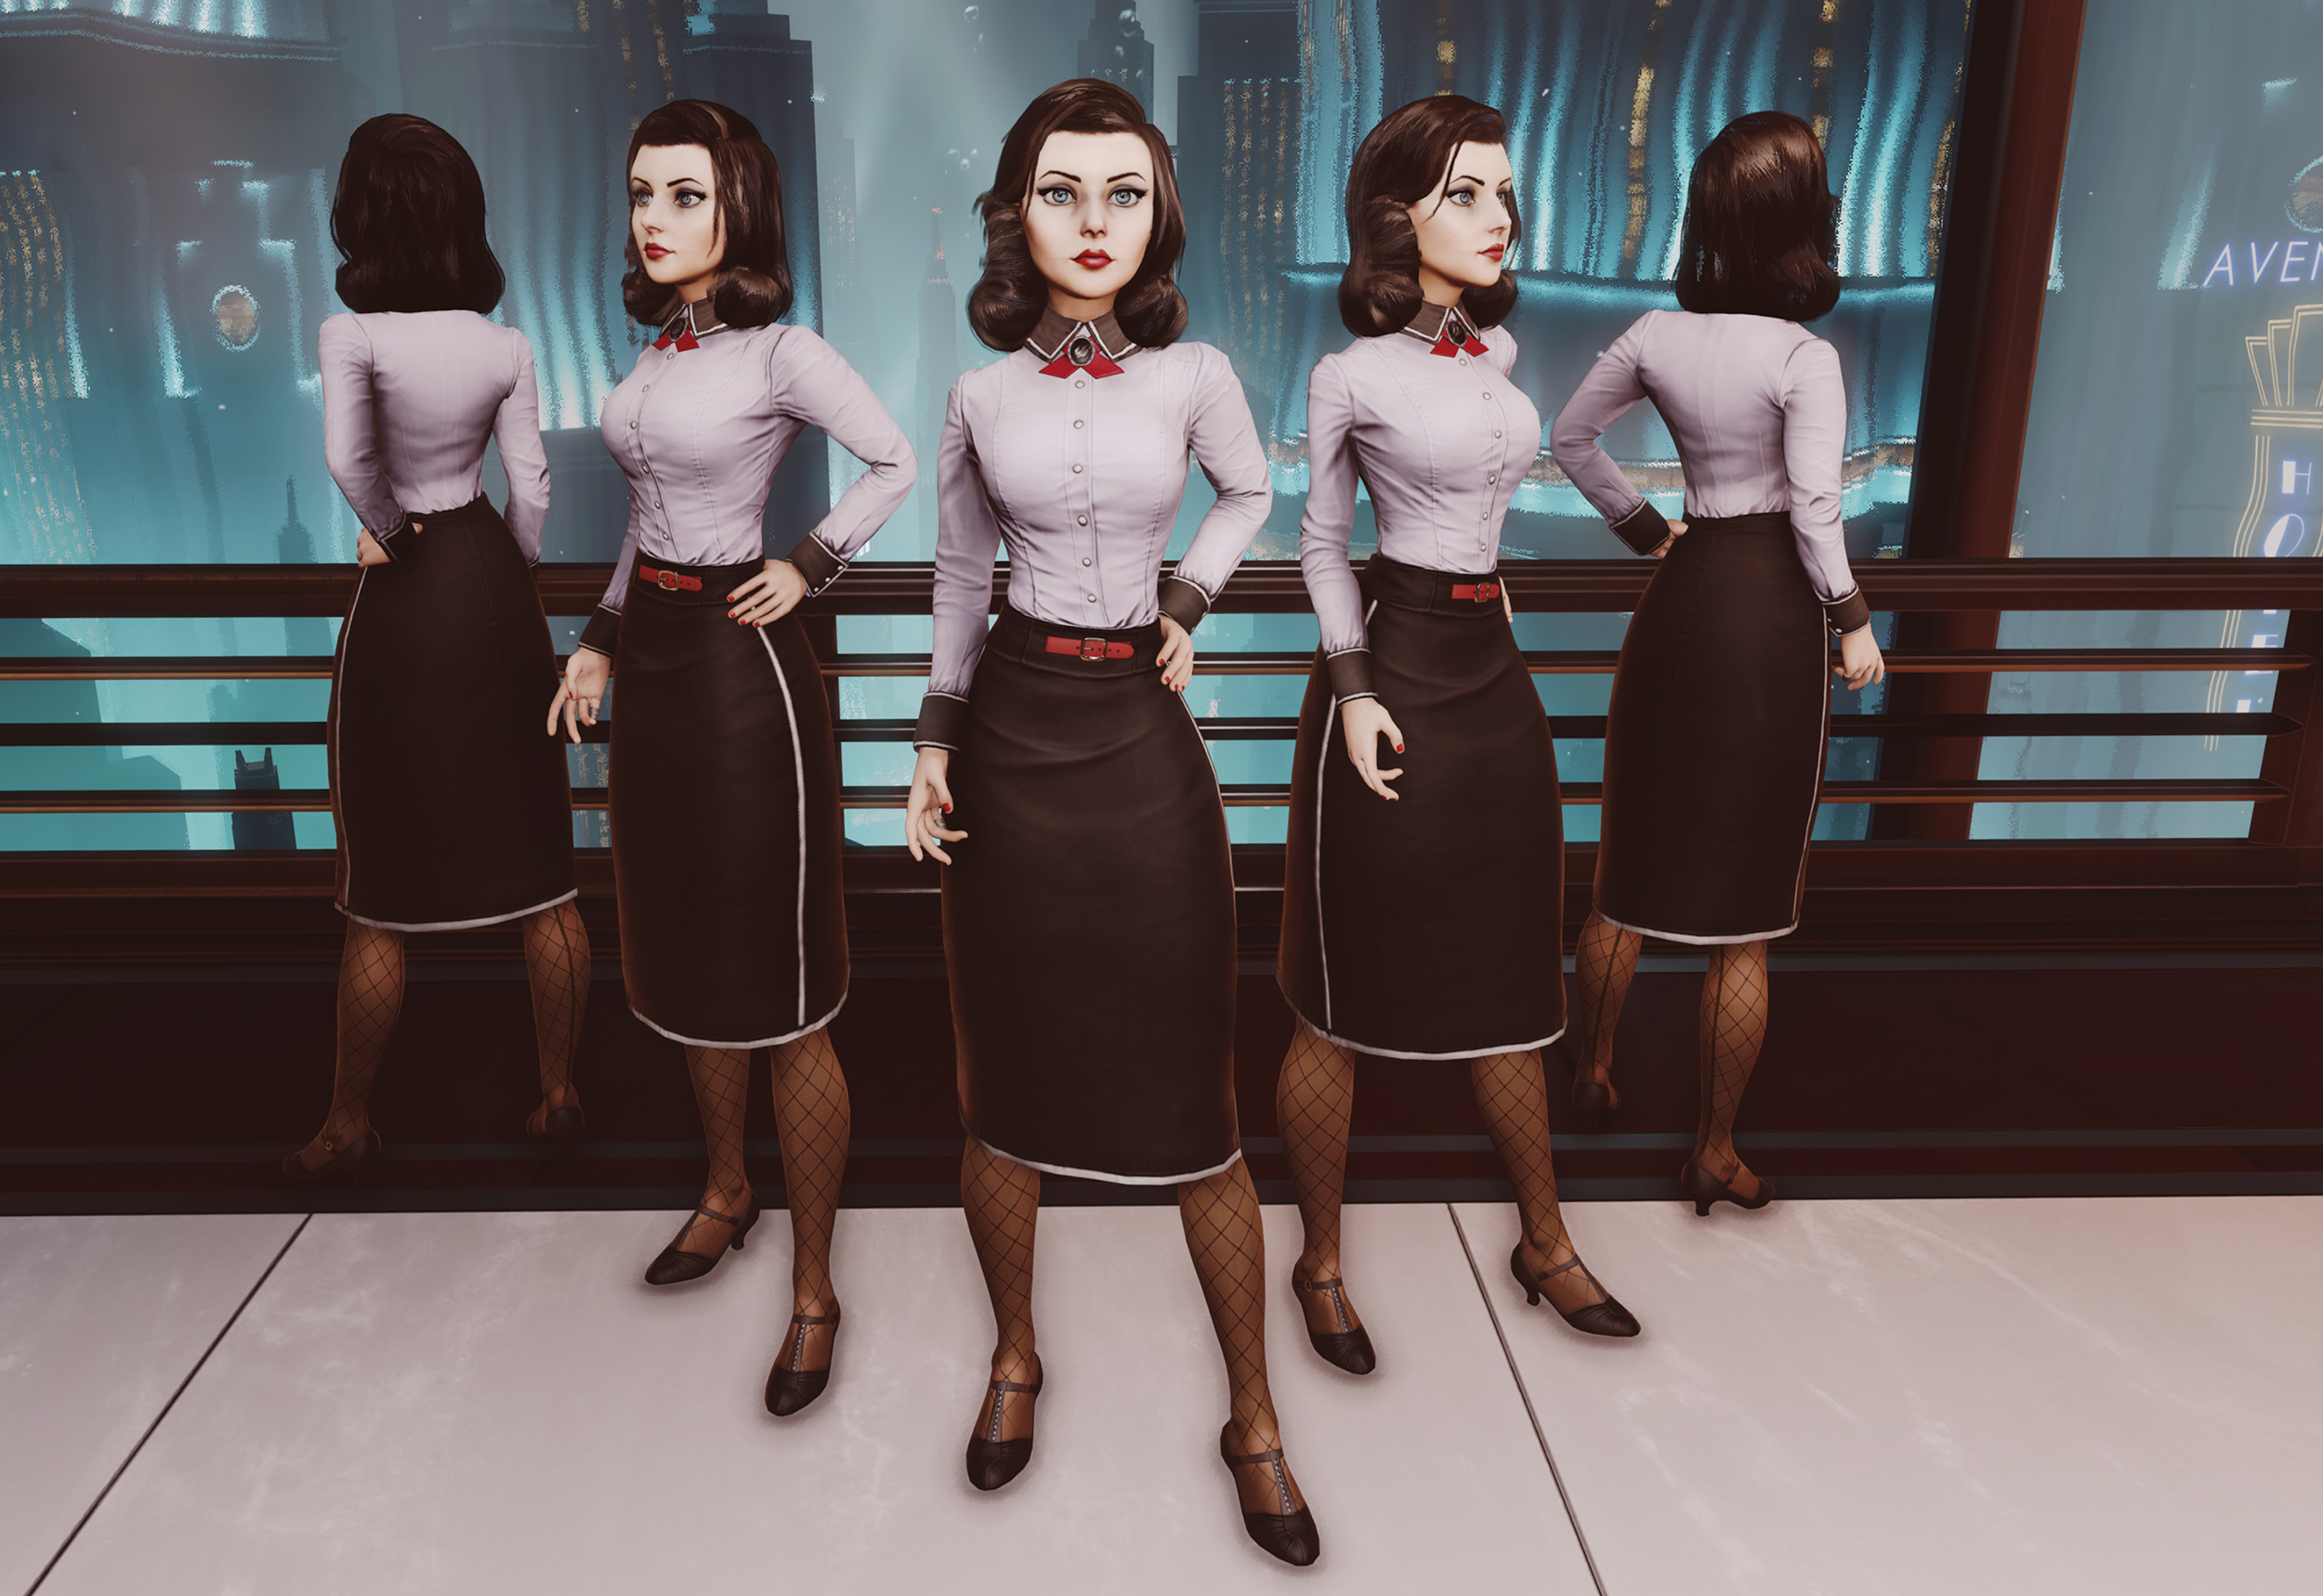 BioShock Infinite: Burial at Sea's Rapture is worth seeing, but Episode One  is disappointing (review)